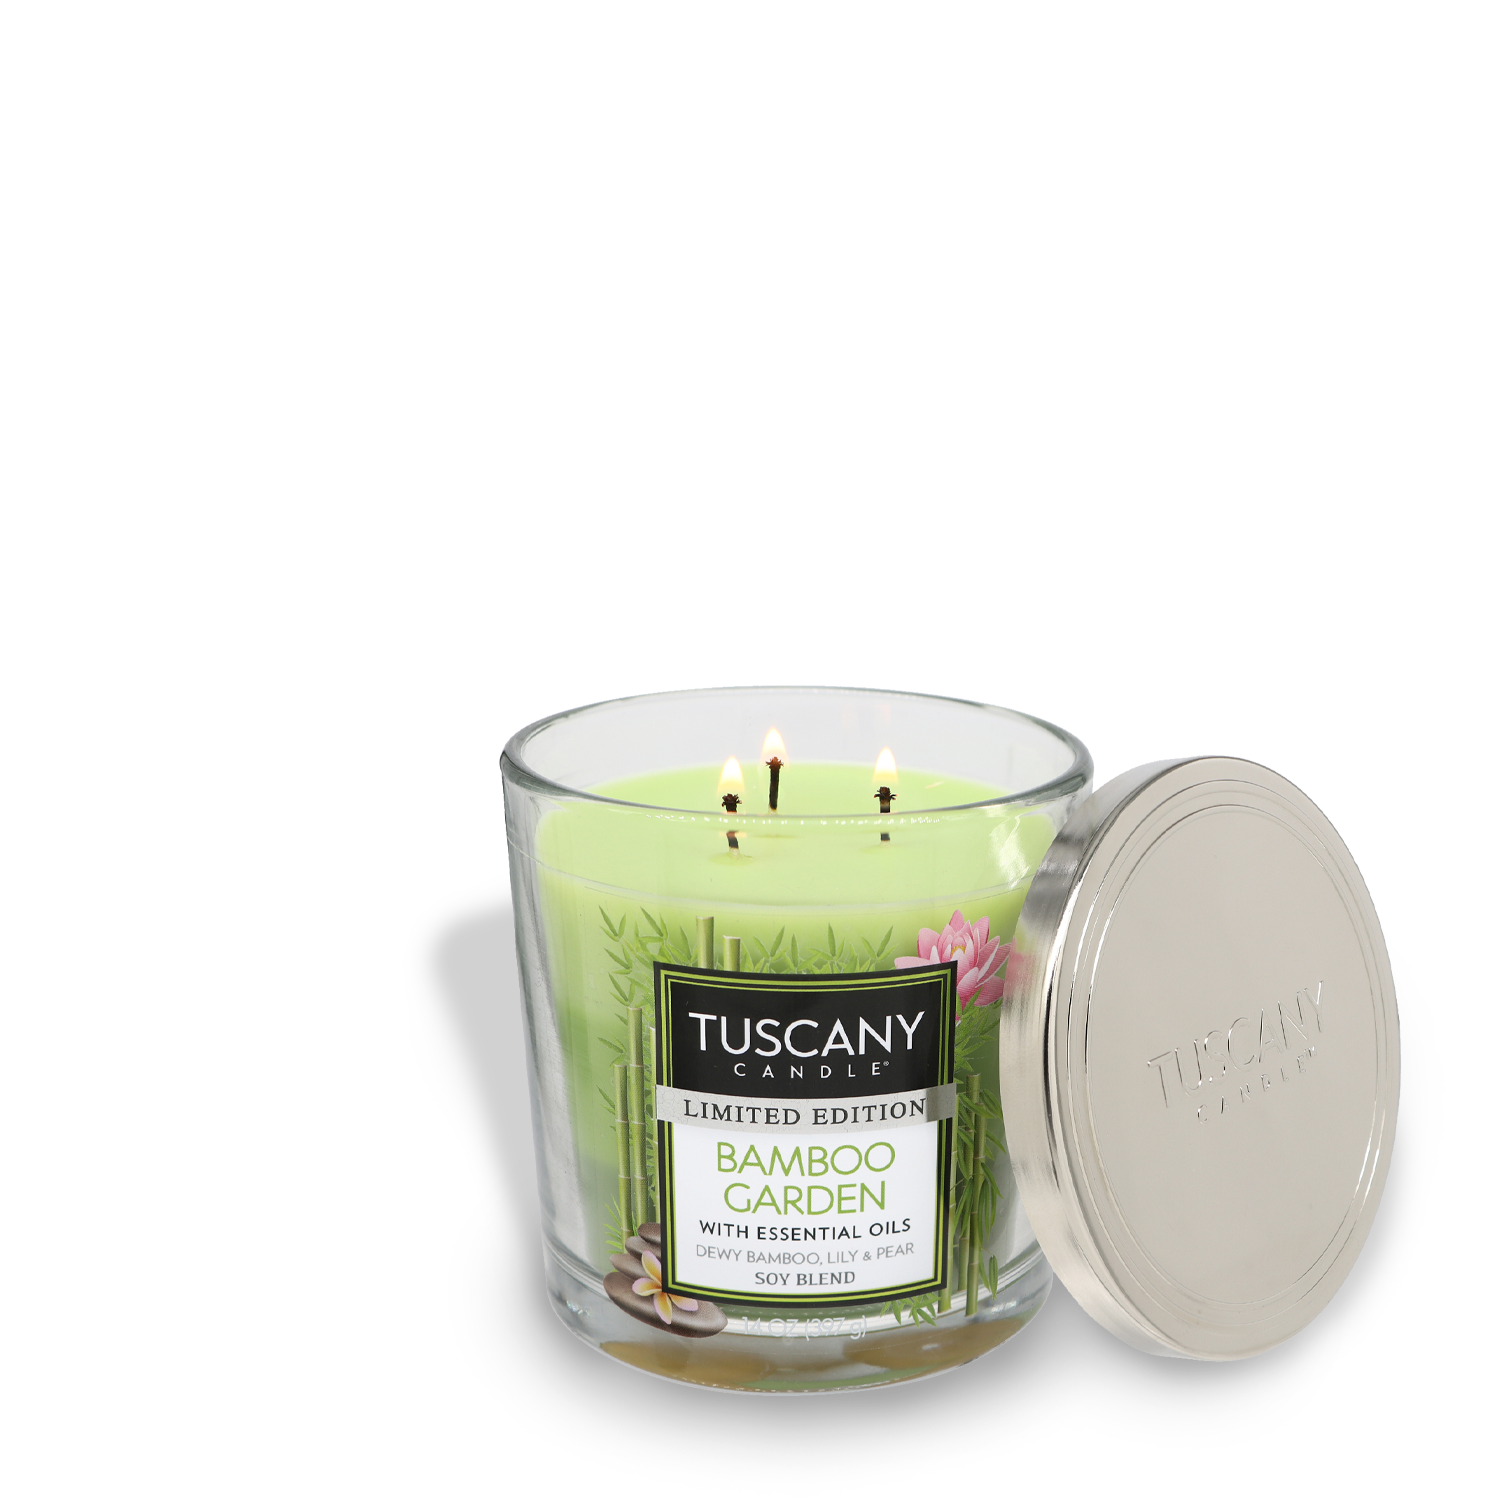 Three-wick scented candle with lid, labeled "Bamboo Garden Long-Lasting Scented Jar Candle (14 oz)" by Tuscany Candle® SEASONAL.